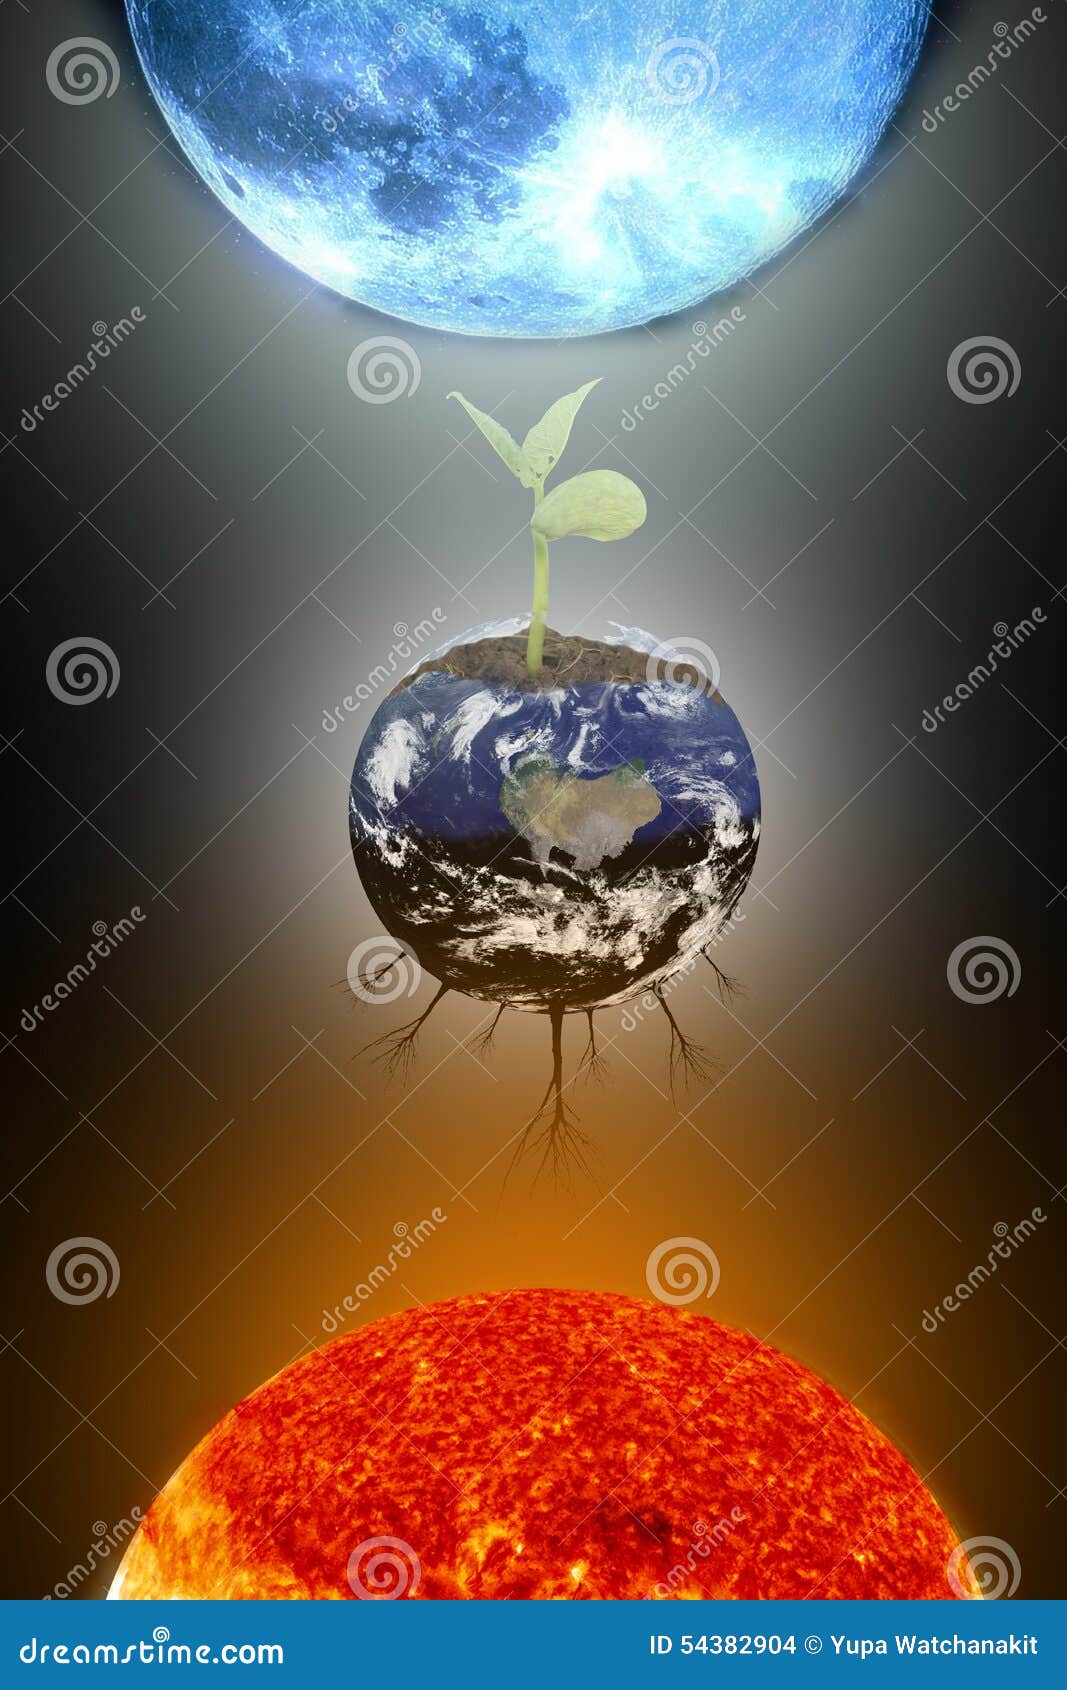 Premium Vector | Earth day half earth with nature illustration